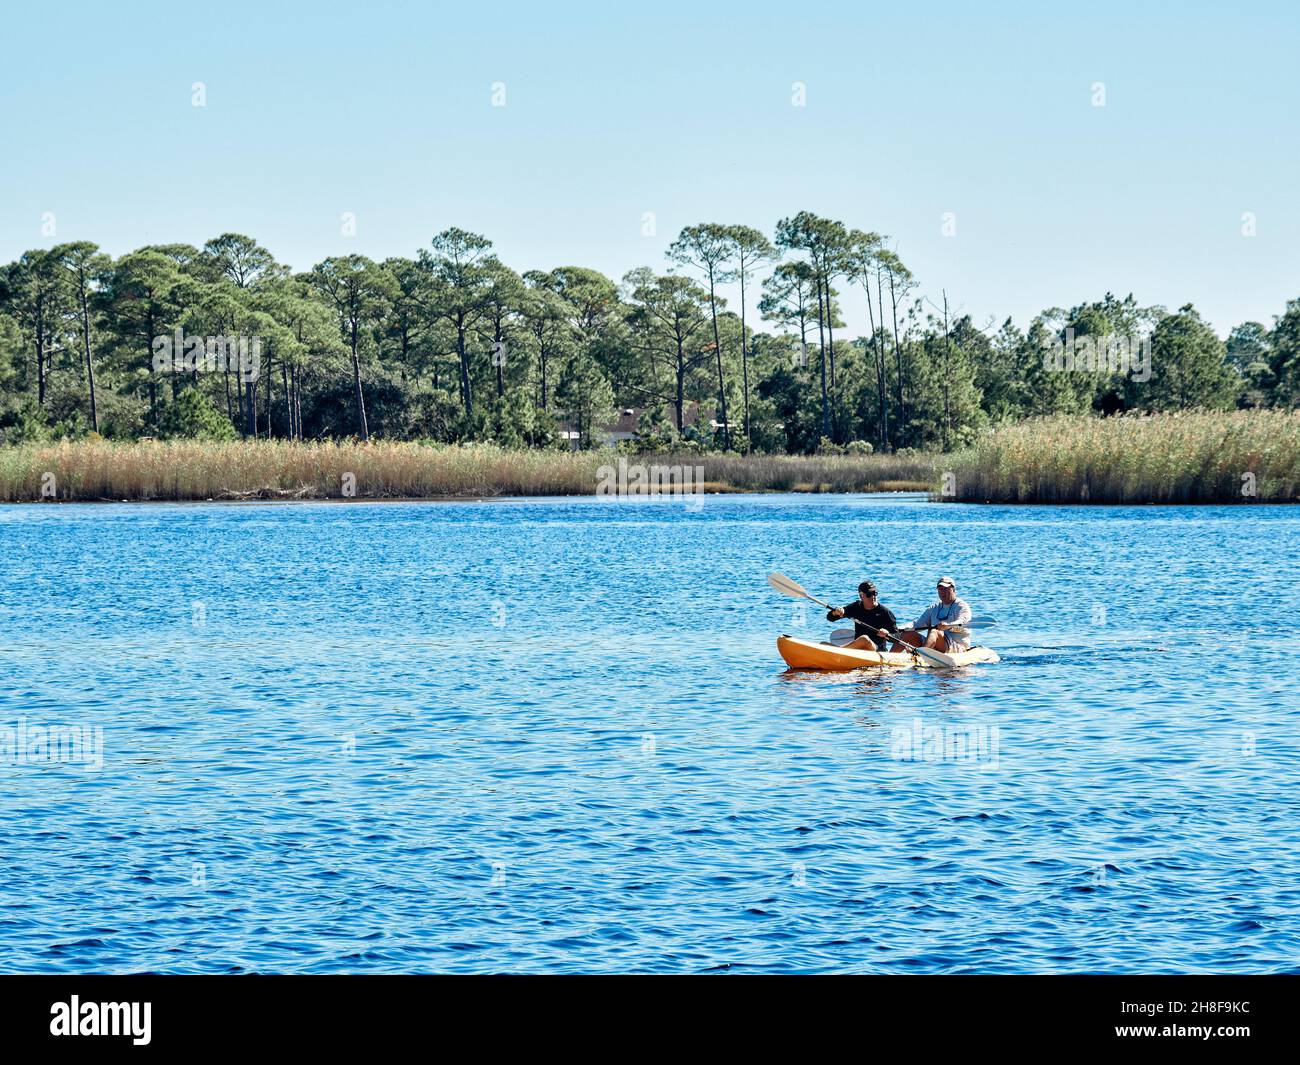 People kayaking in Western Lake in Grayton Beach State Park a popular tourist recreation area in the Florida Gulf coast panhandle. Stock Photo